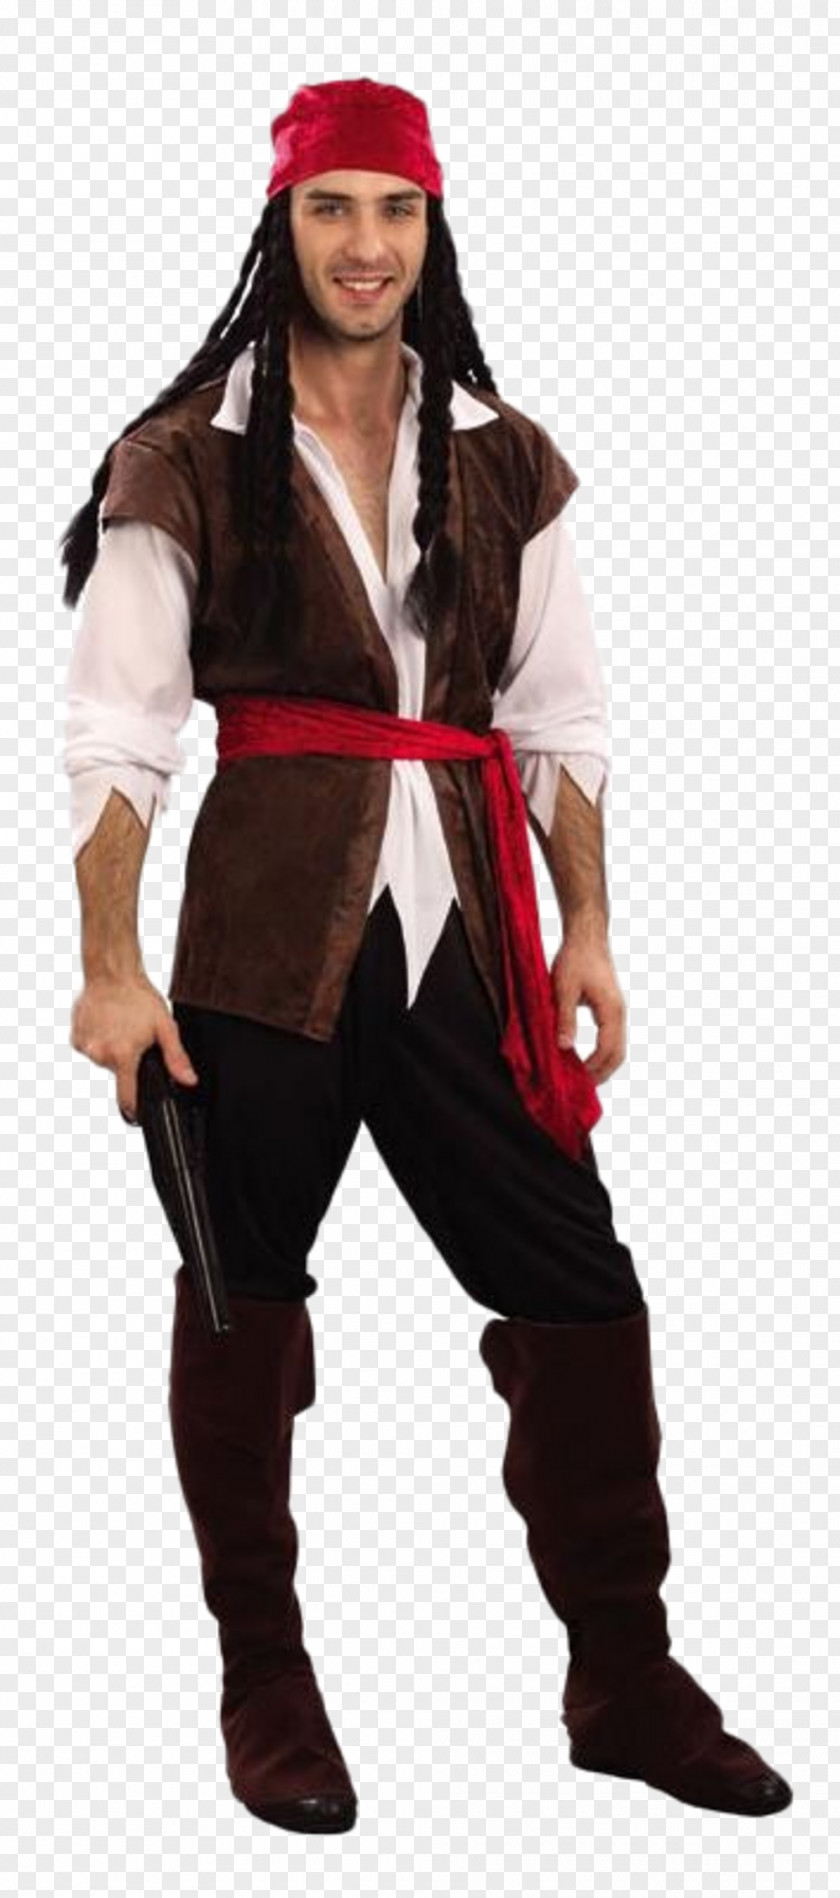 Costume Party Jack Sparrow Piracy Clothing PNG